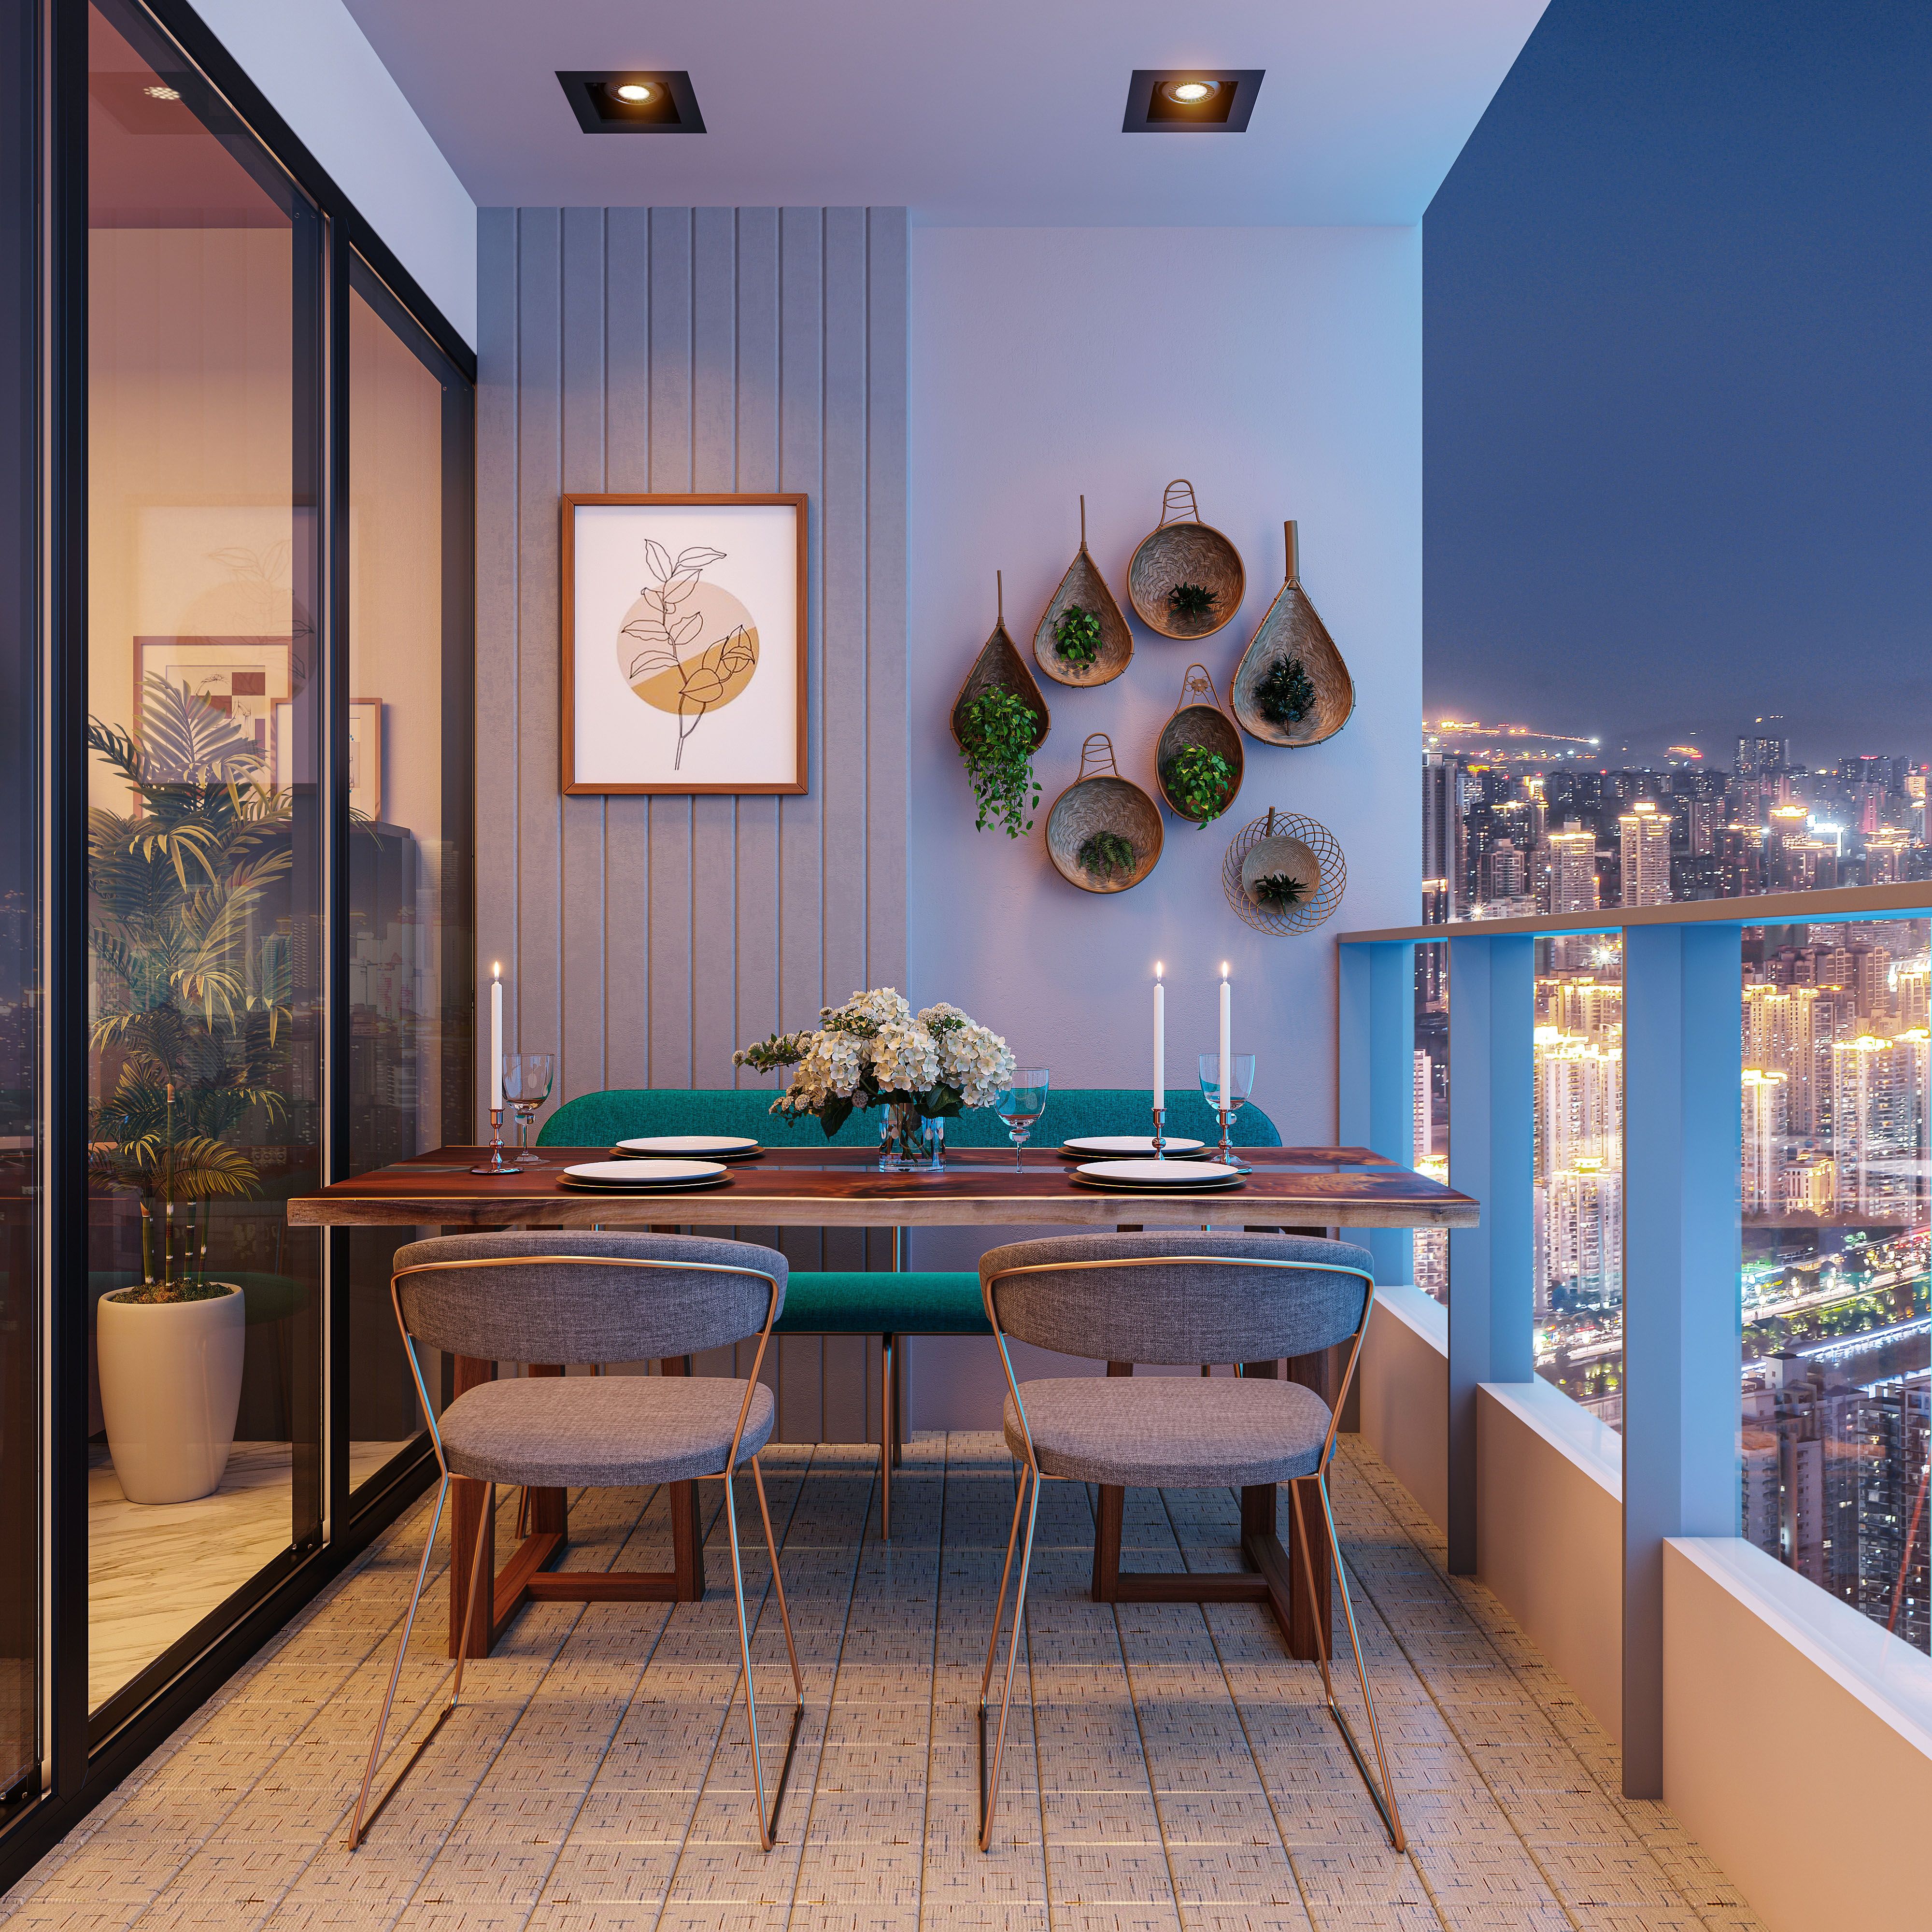 Luxury Balcony With Outdoor Seating And Dining Area